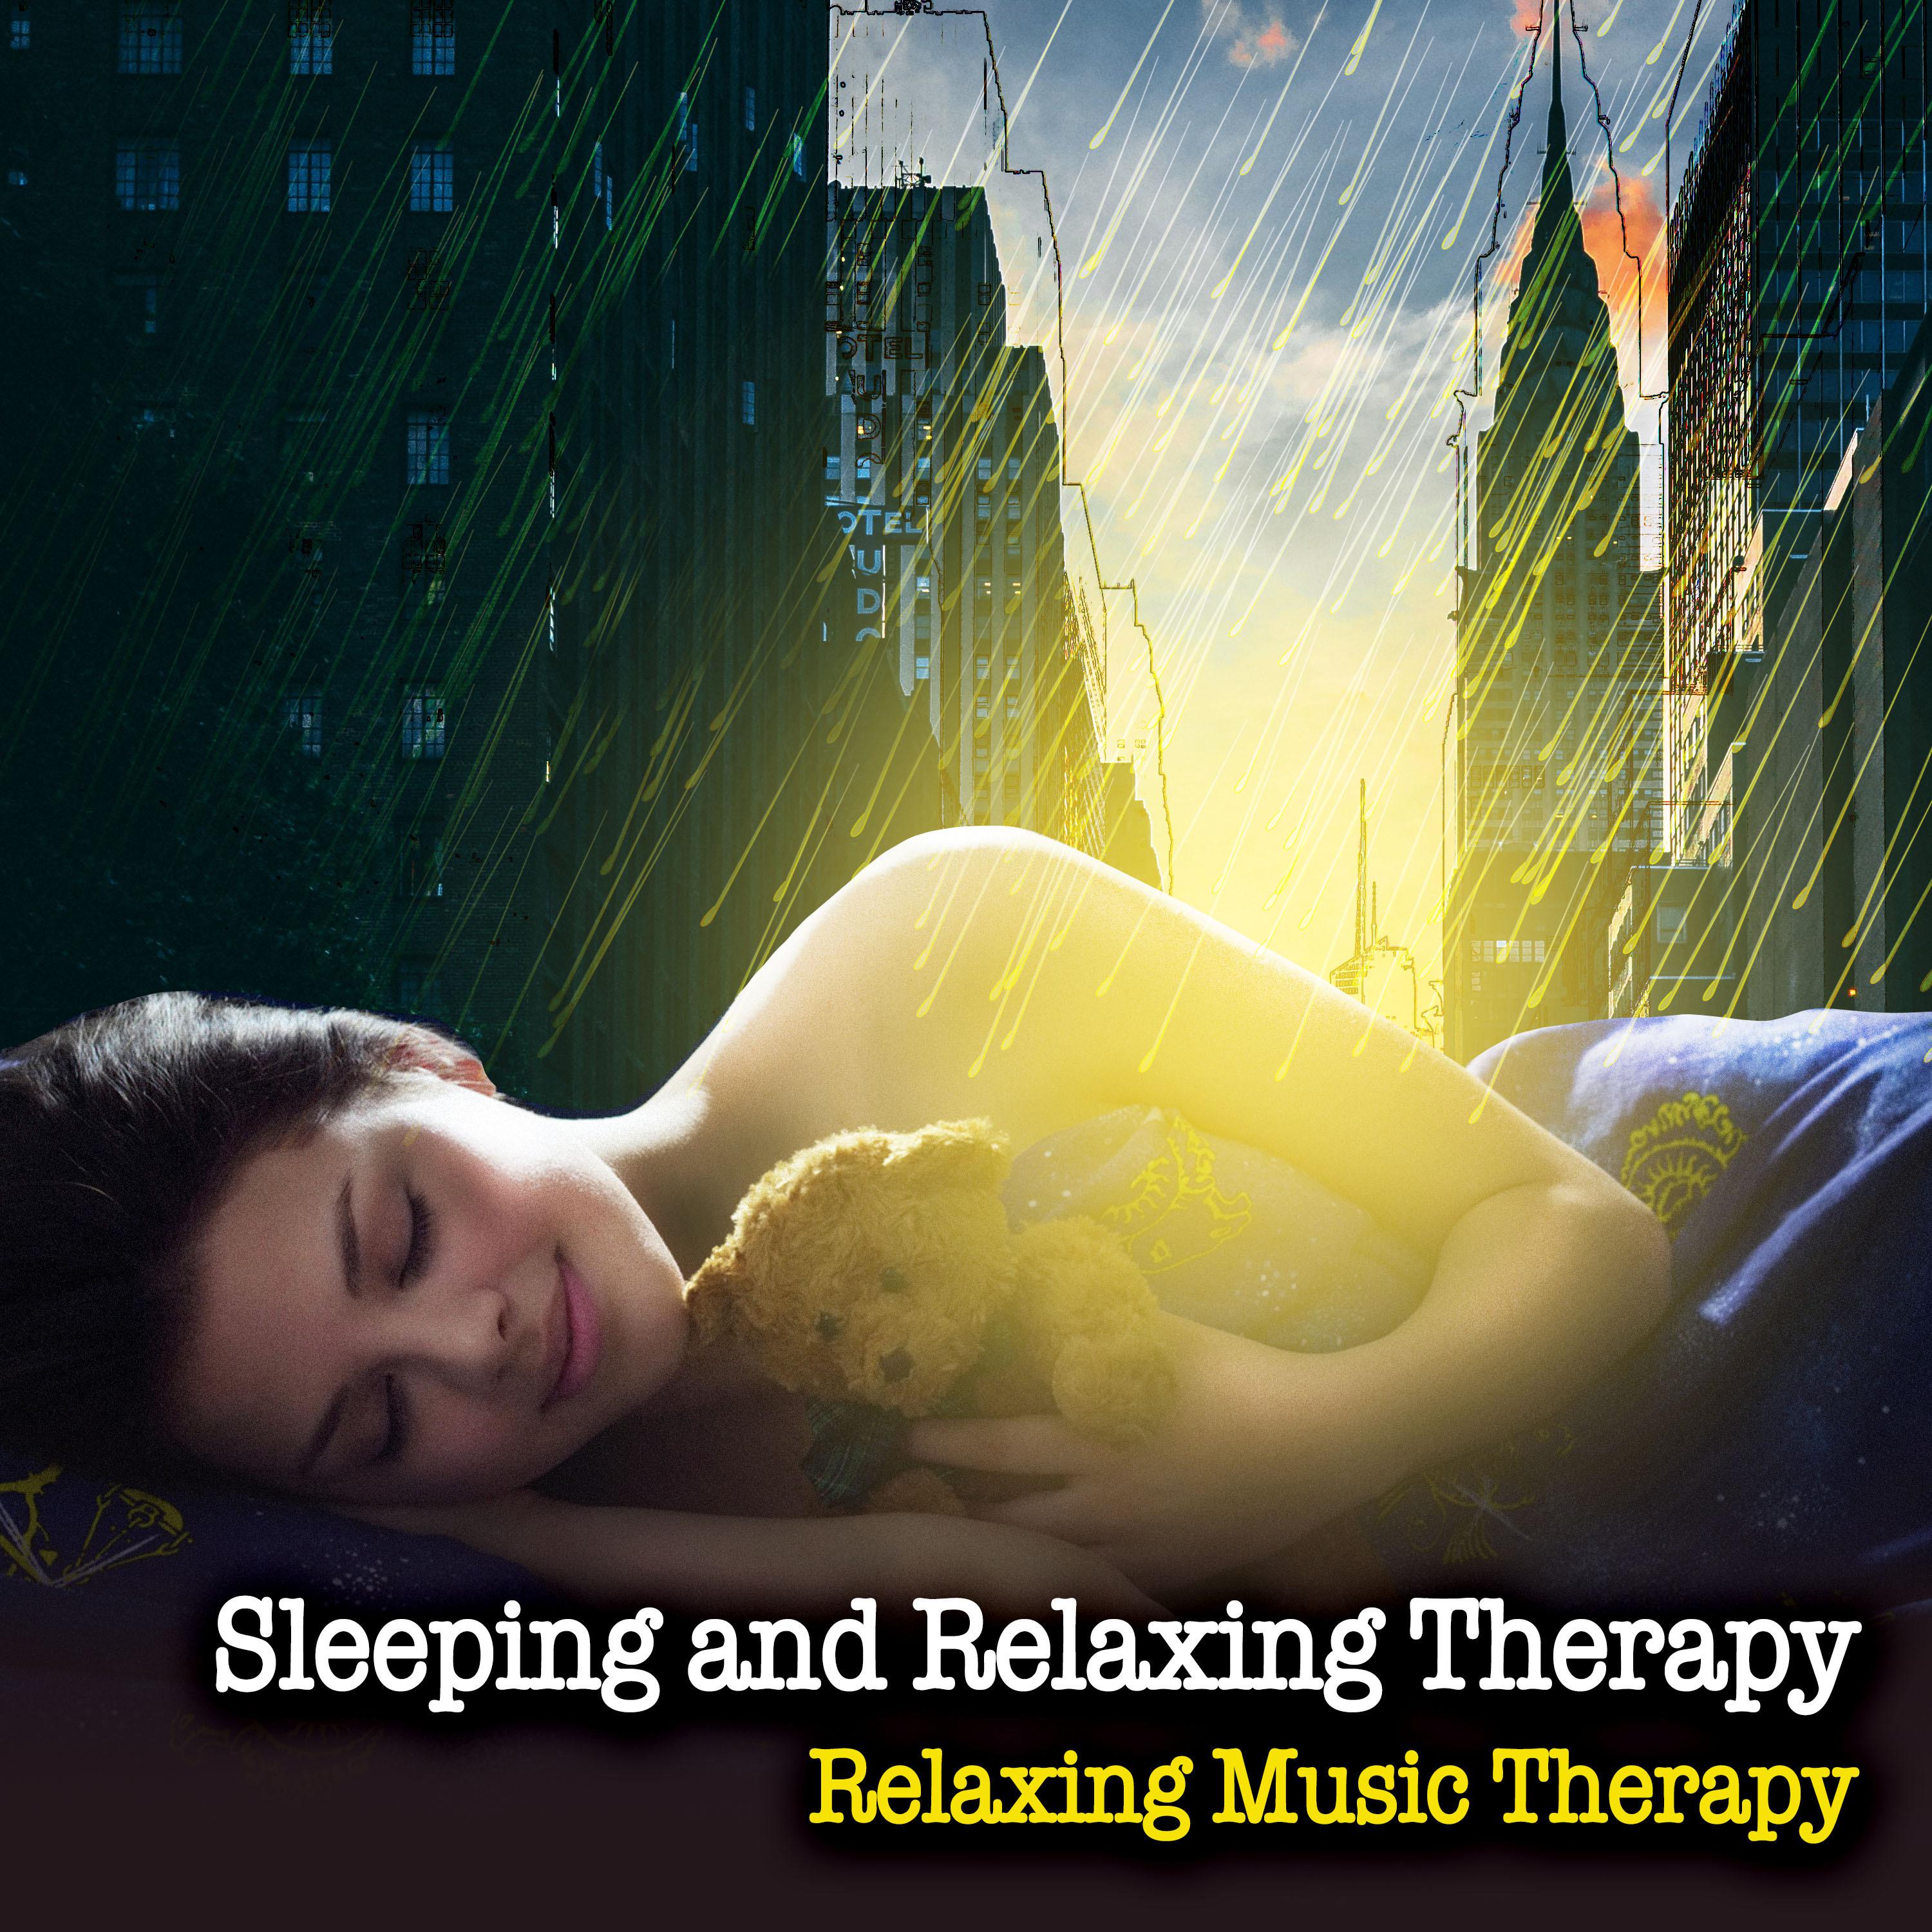 Sleeping and Relaxing Therapy